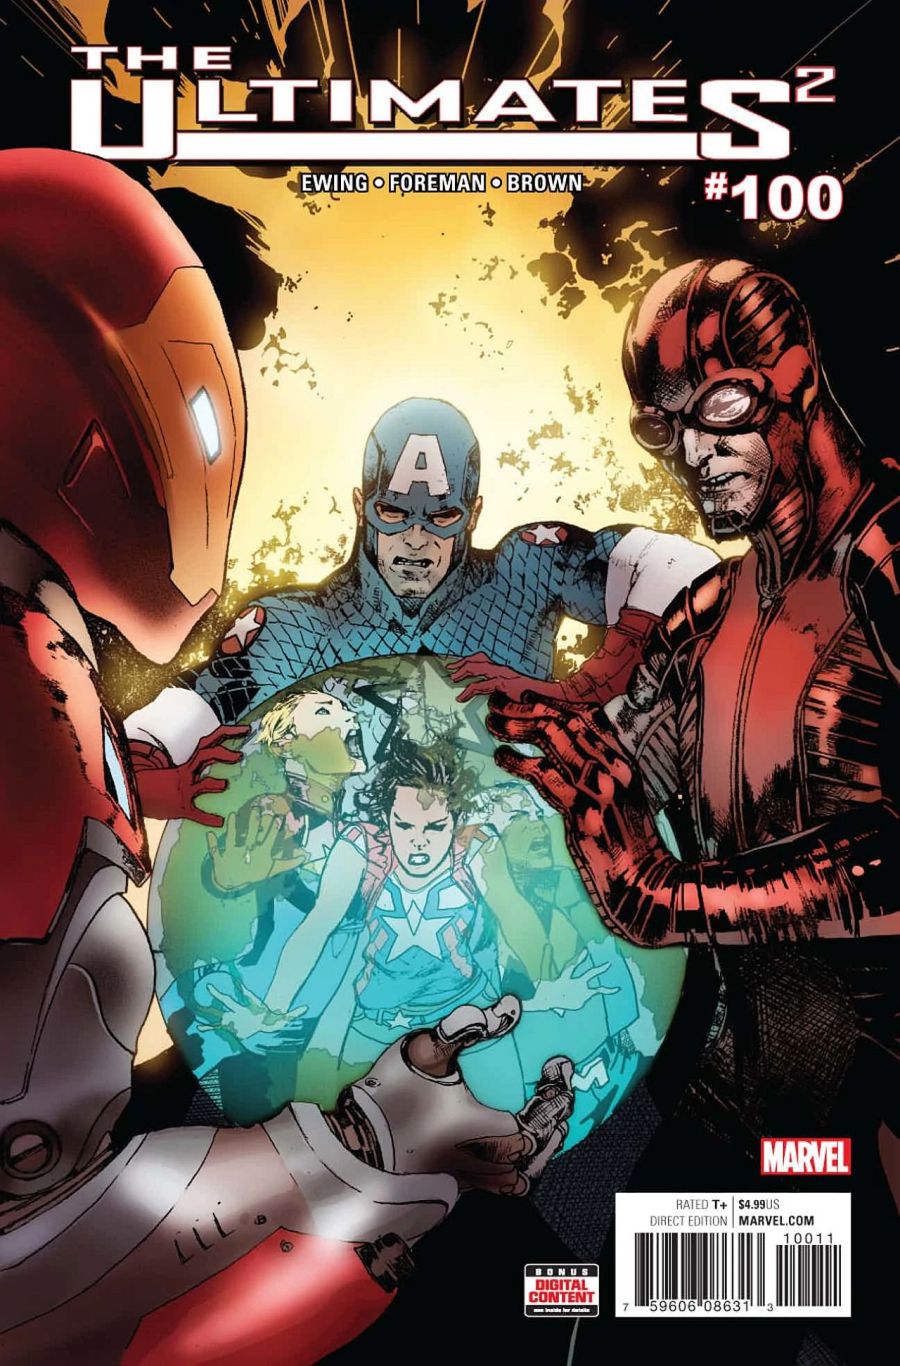 The Ultimates^2 #100